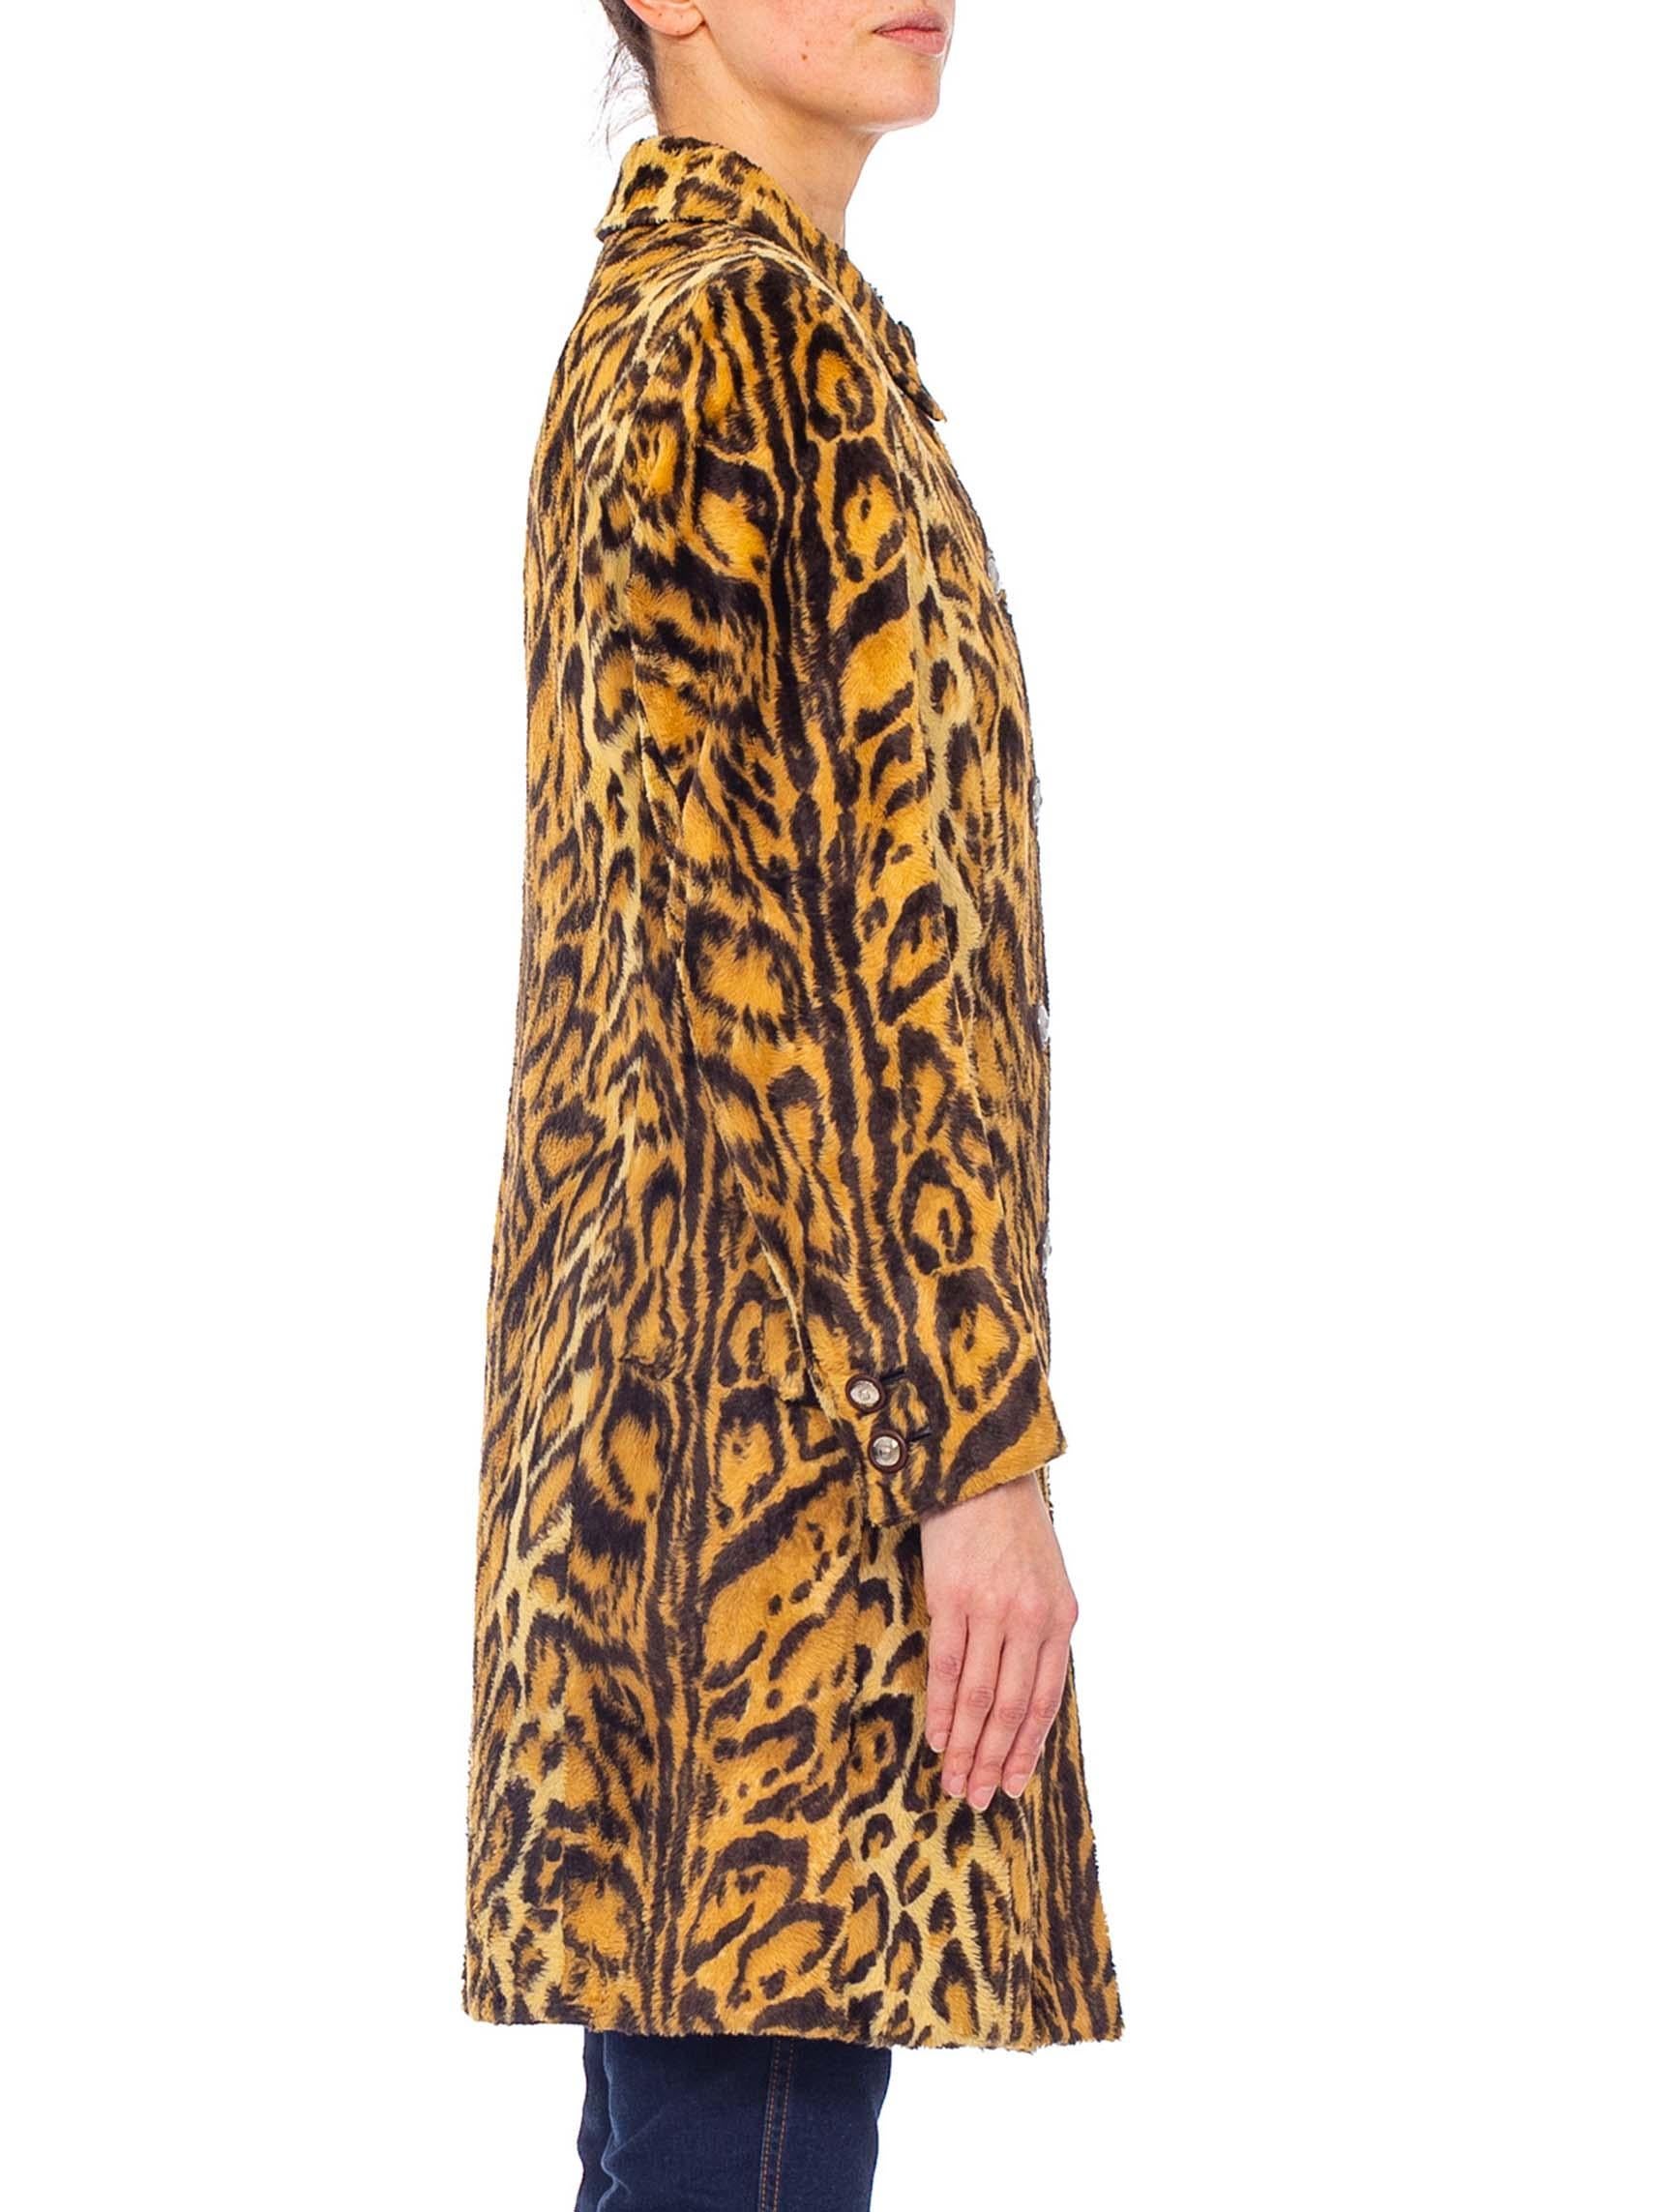 1990'S GIANNI VERSACE Leopard Print Faux Fur Velvety Coat In Excellent Condition In New York, NY